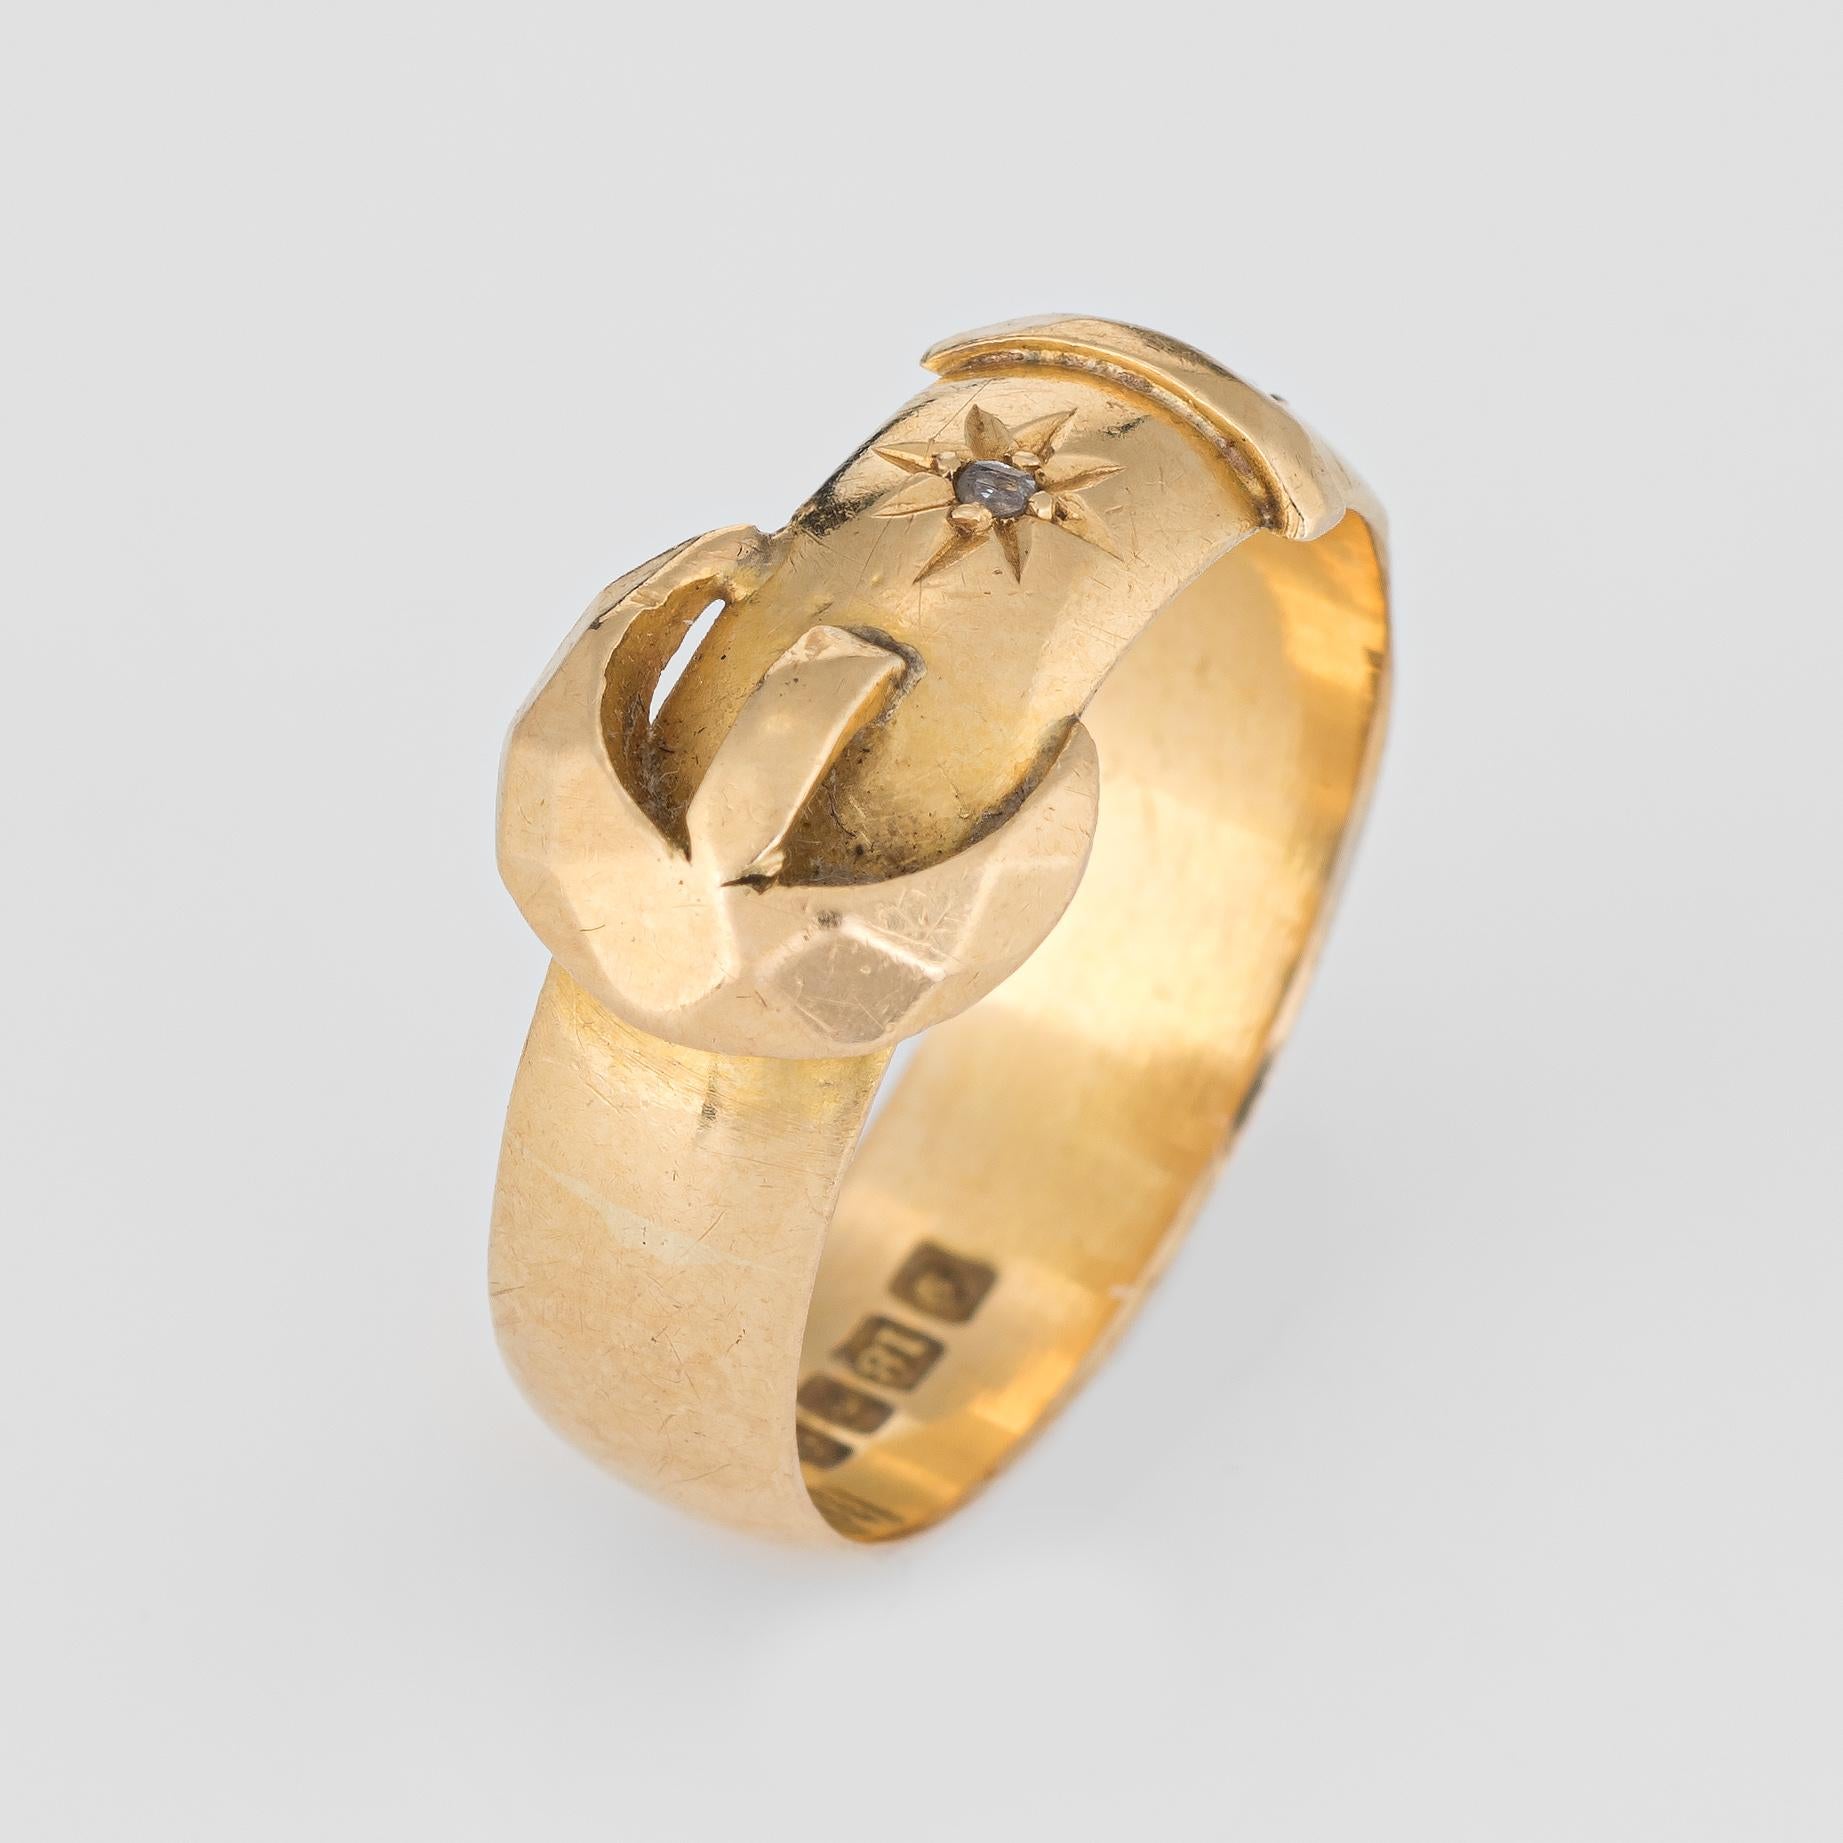 Finely detailed antique buckle ring (circa 1918), crafted in 18 karat yellow gold. 

Two estimated 0.01 carat old rose cut diamond chips are set into the mount. The total diamond weight is estimated at 0.02 carats (estimated at I-J color and I2